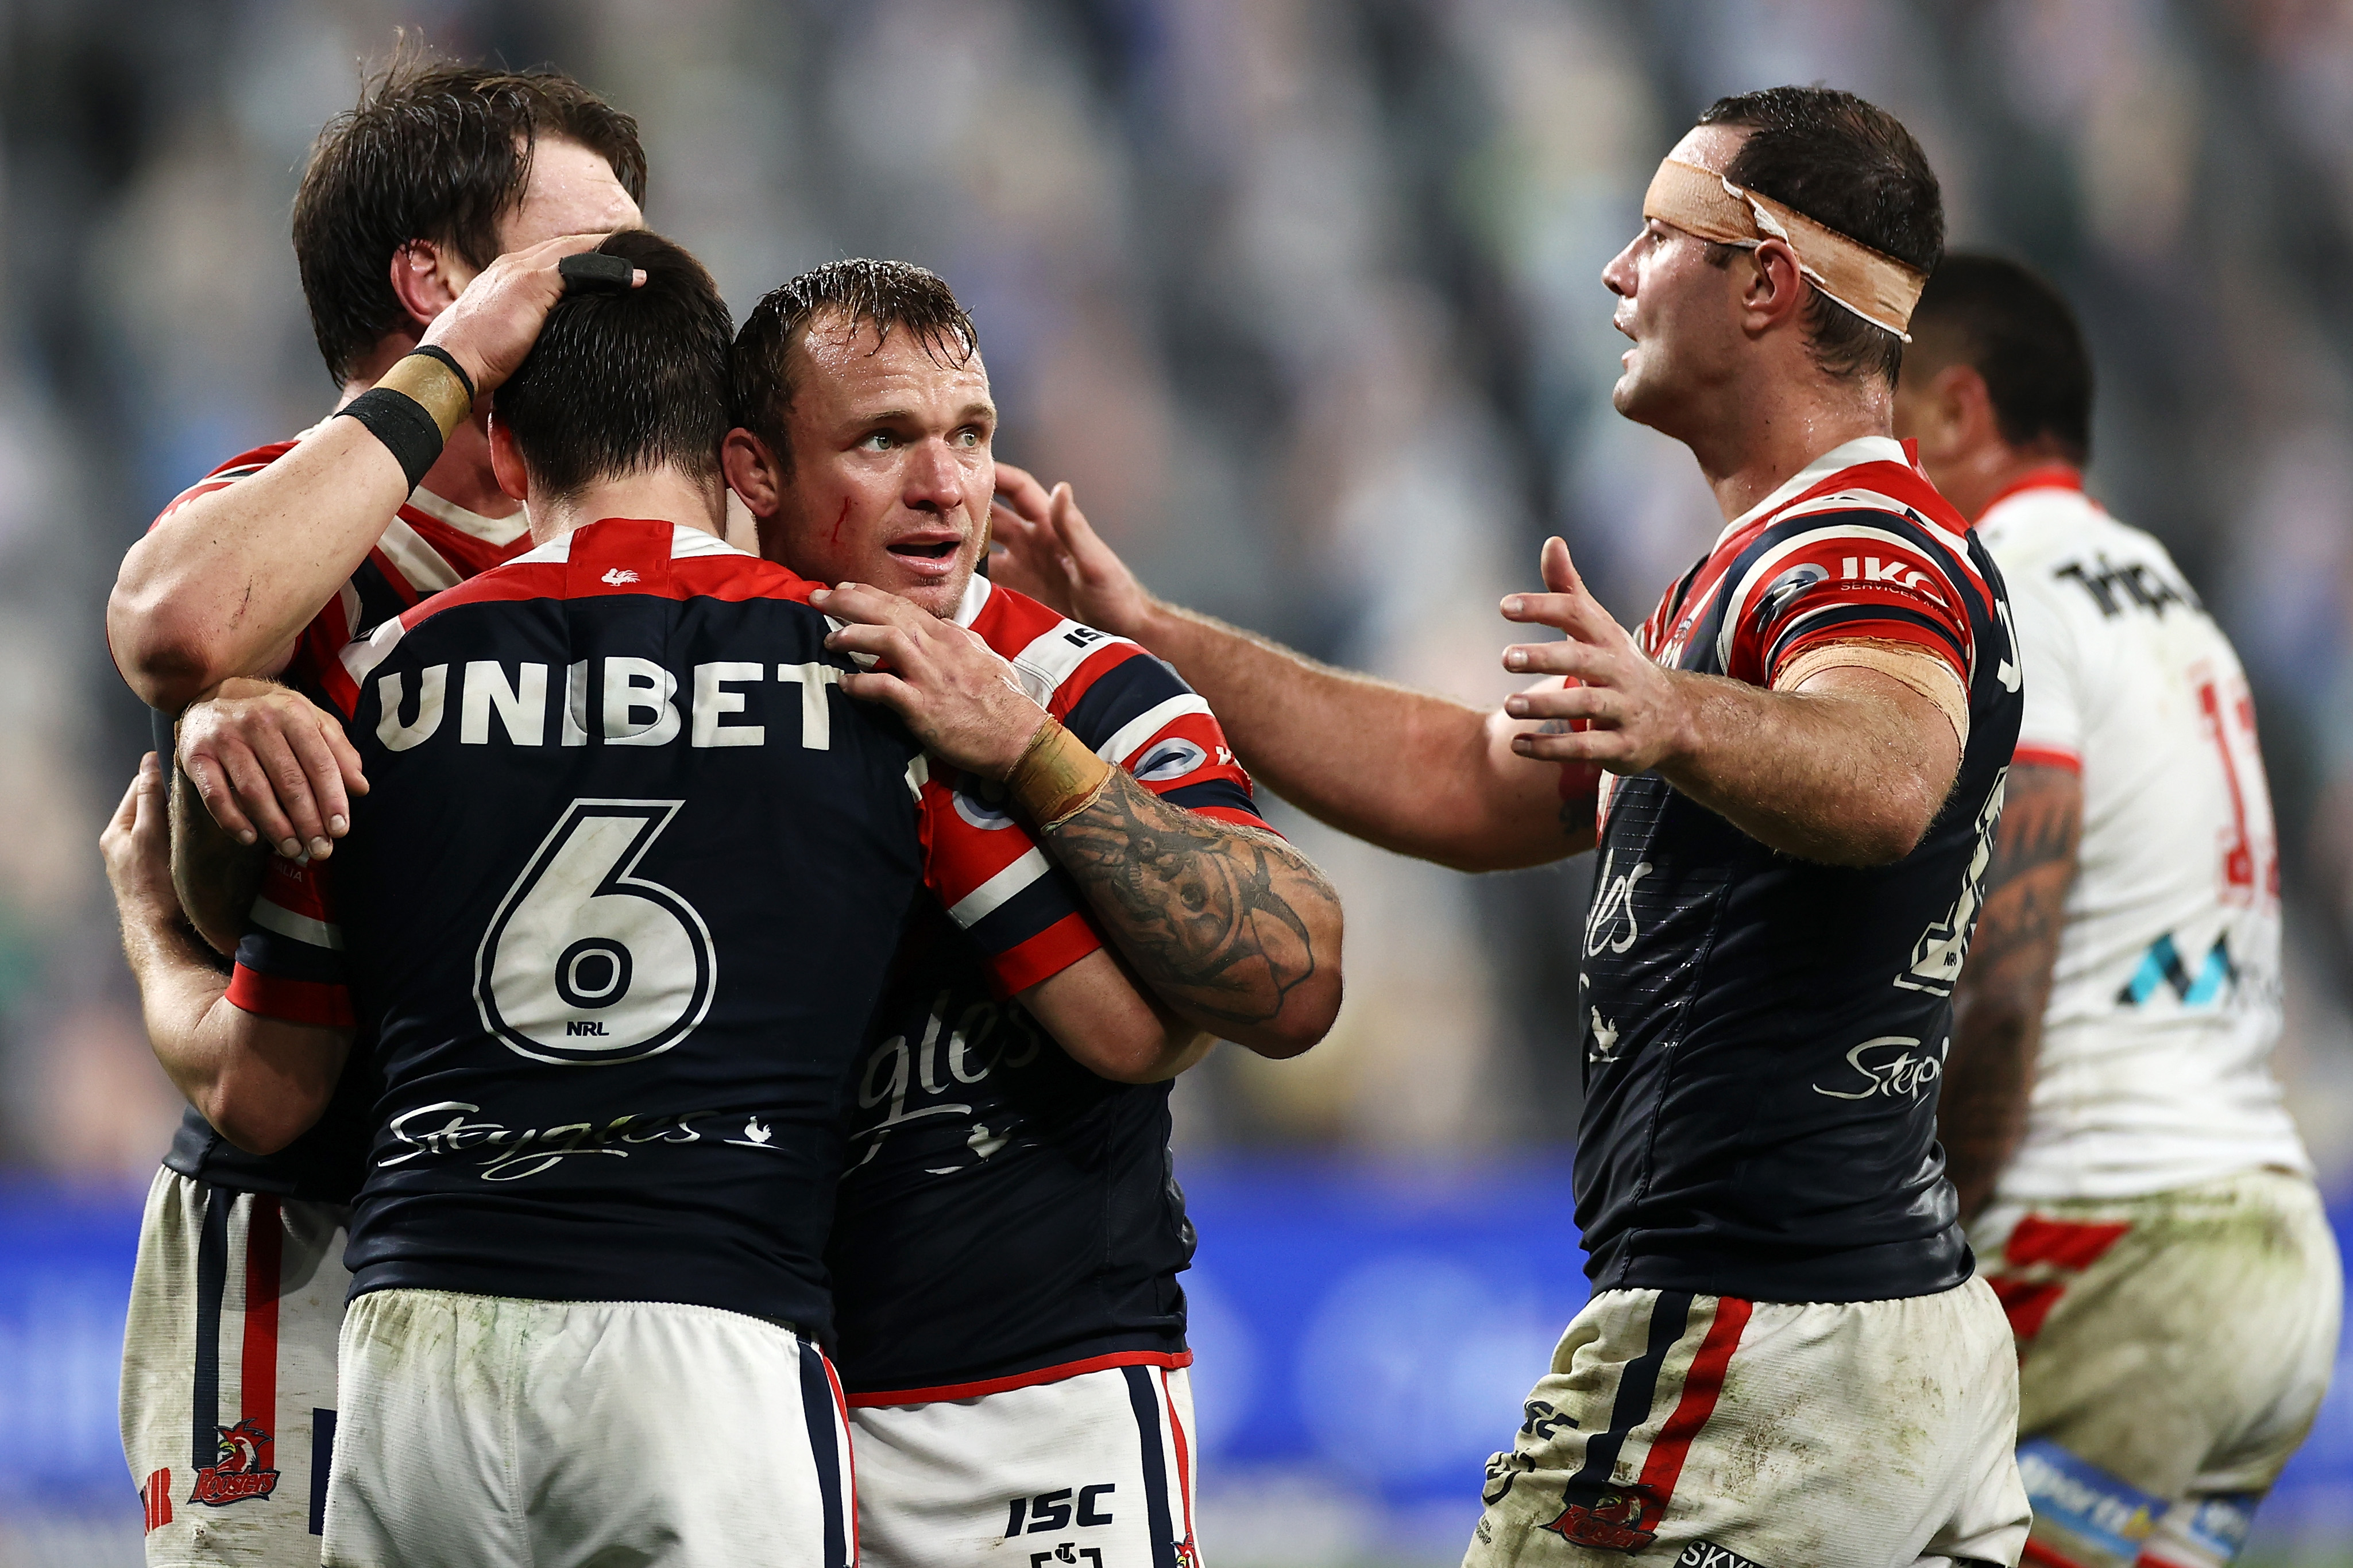 Angus Crichton, Jake Friend and Boyd Cordner congratulate Luke Keary after he scored agaisnt the Dragons in 2020. (Photo by Cameron Spencer/Getty Images)